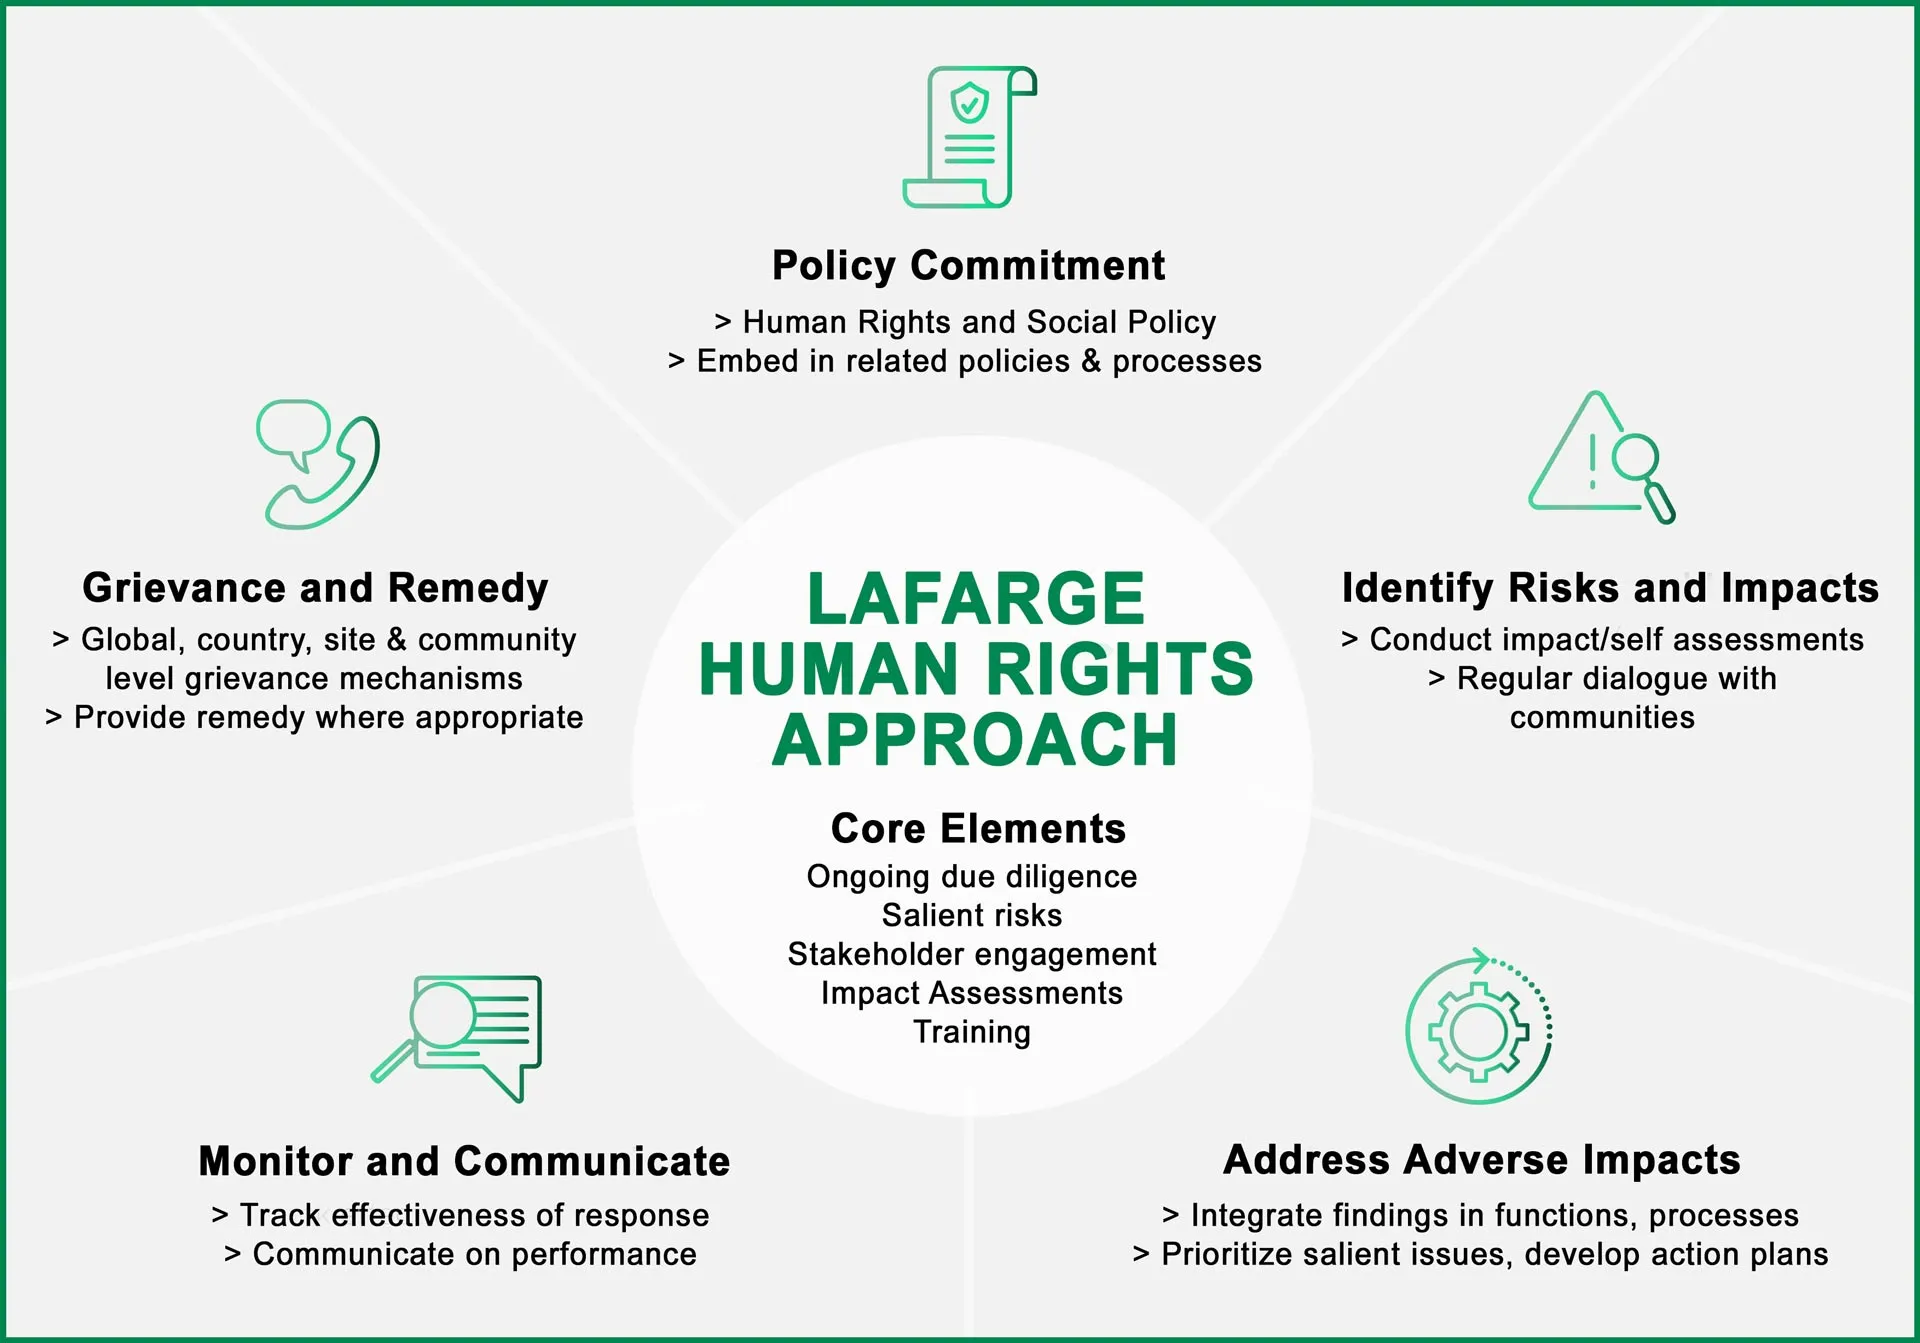 lafarge hrights infographic